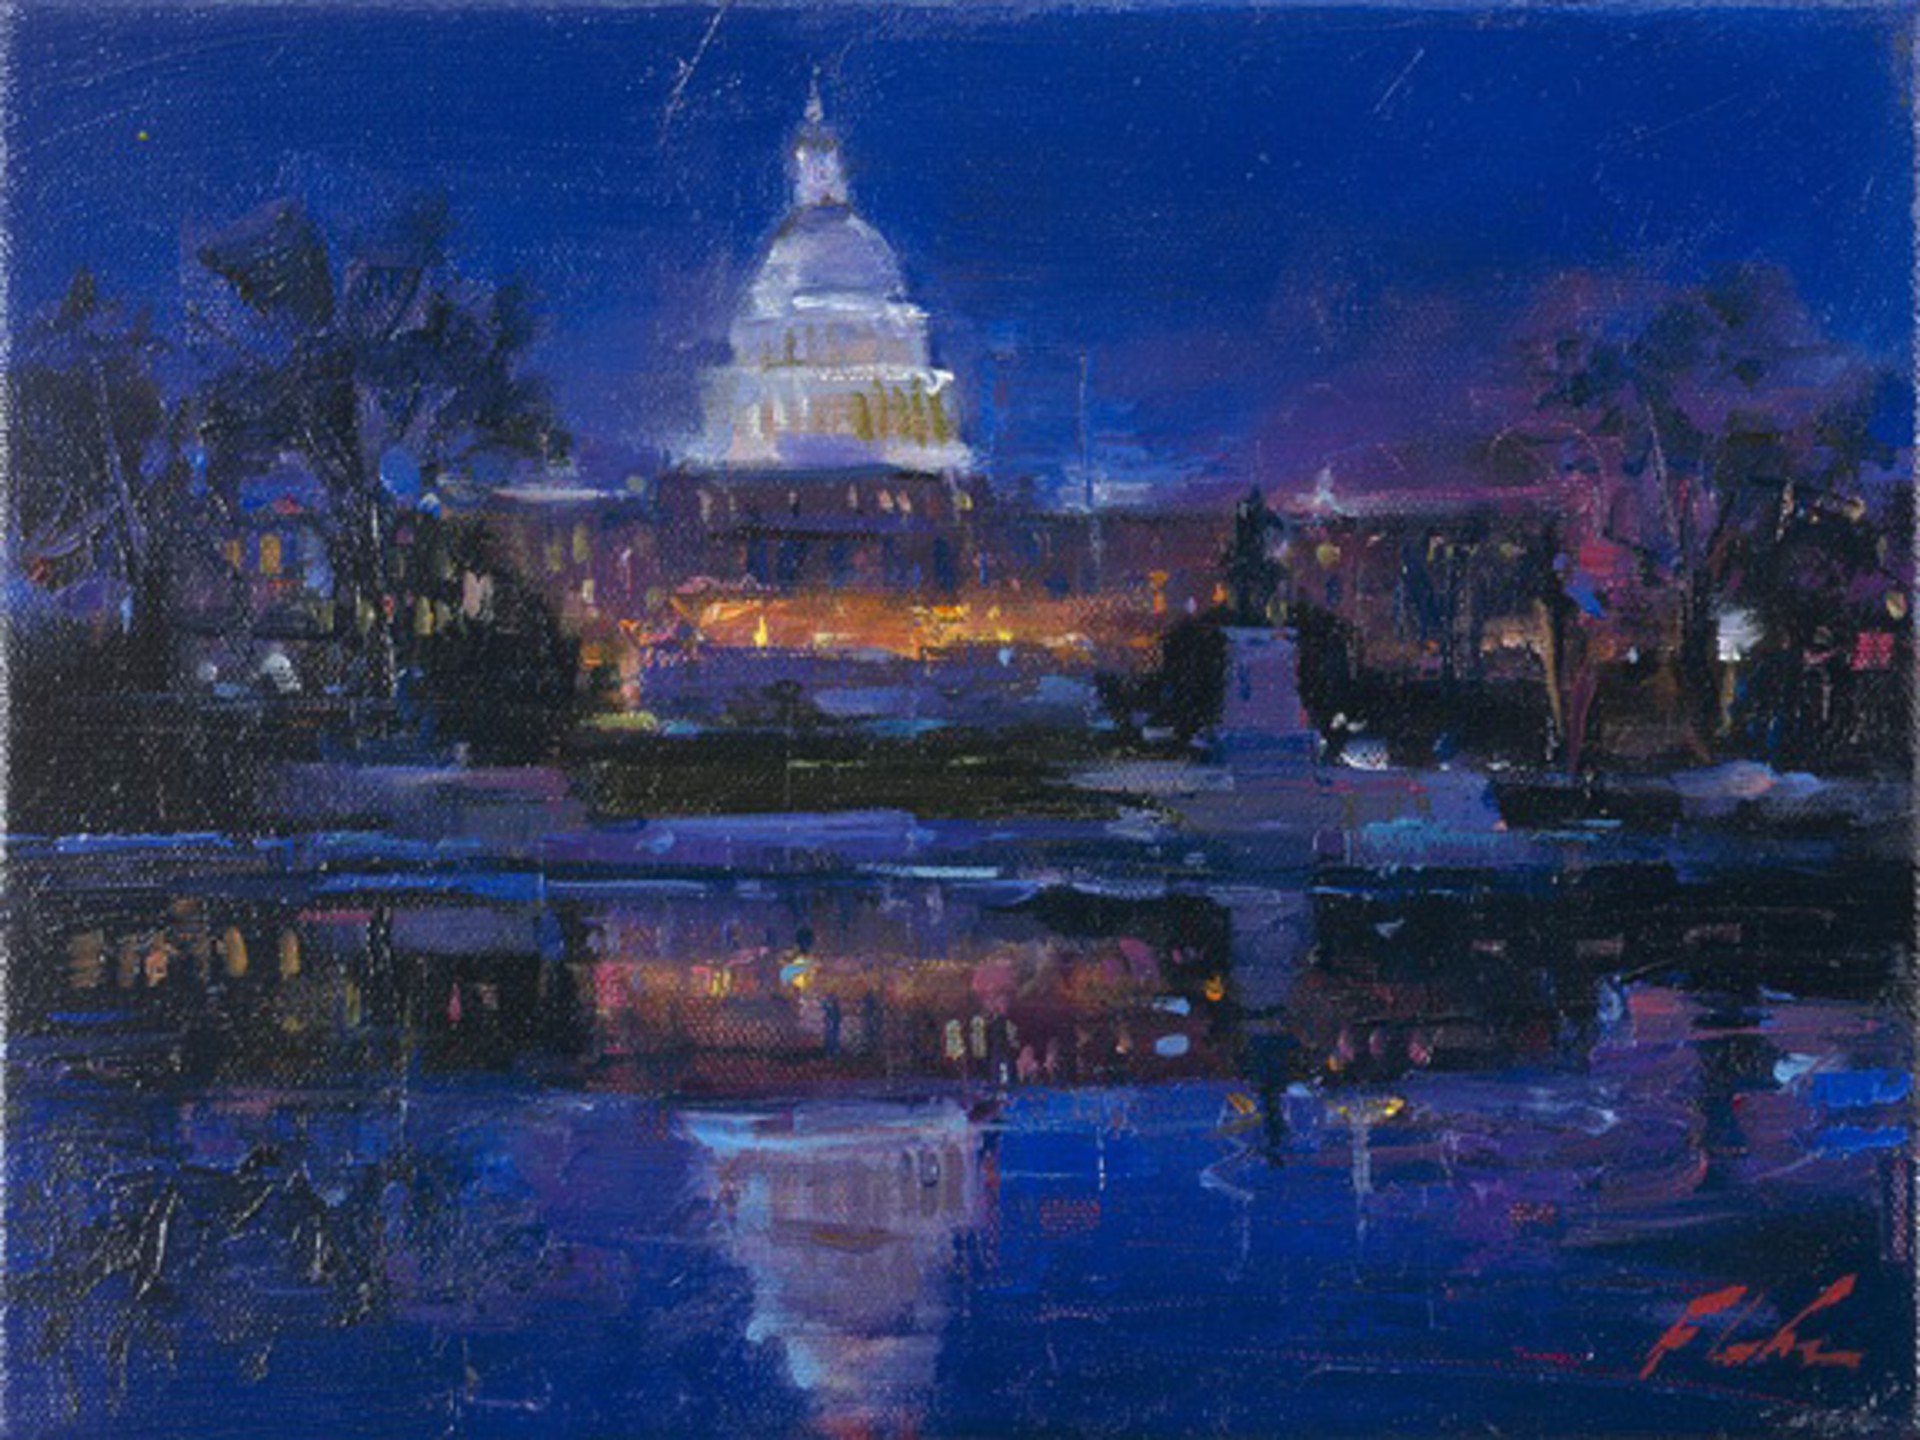 Capital Building, Washington Postcards From Around the World by Michael Flohr